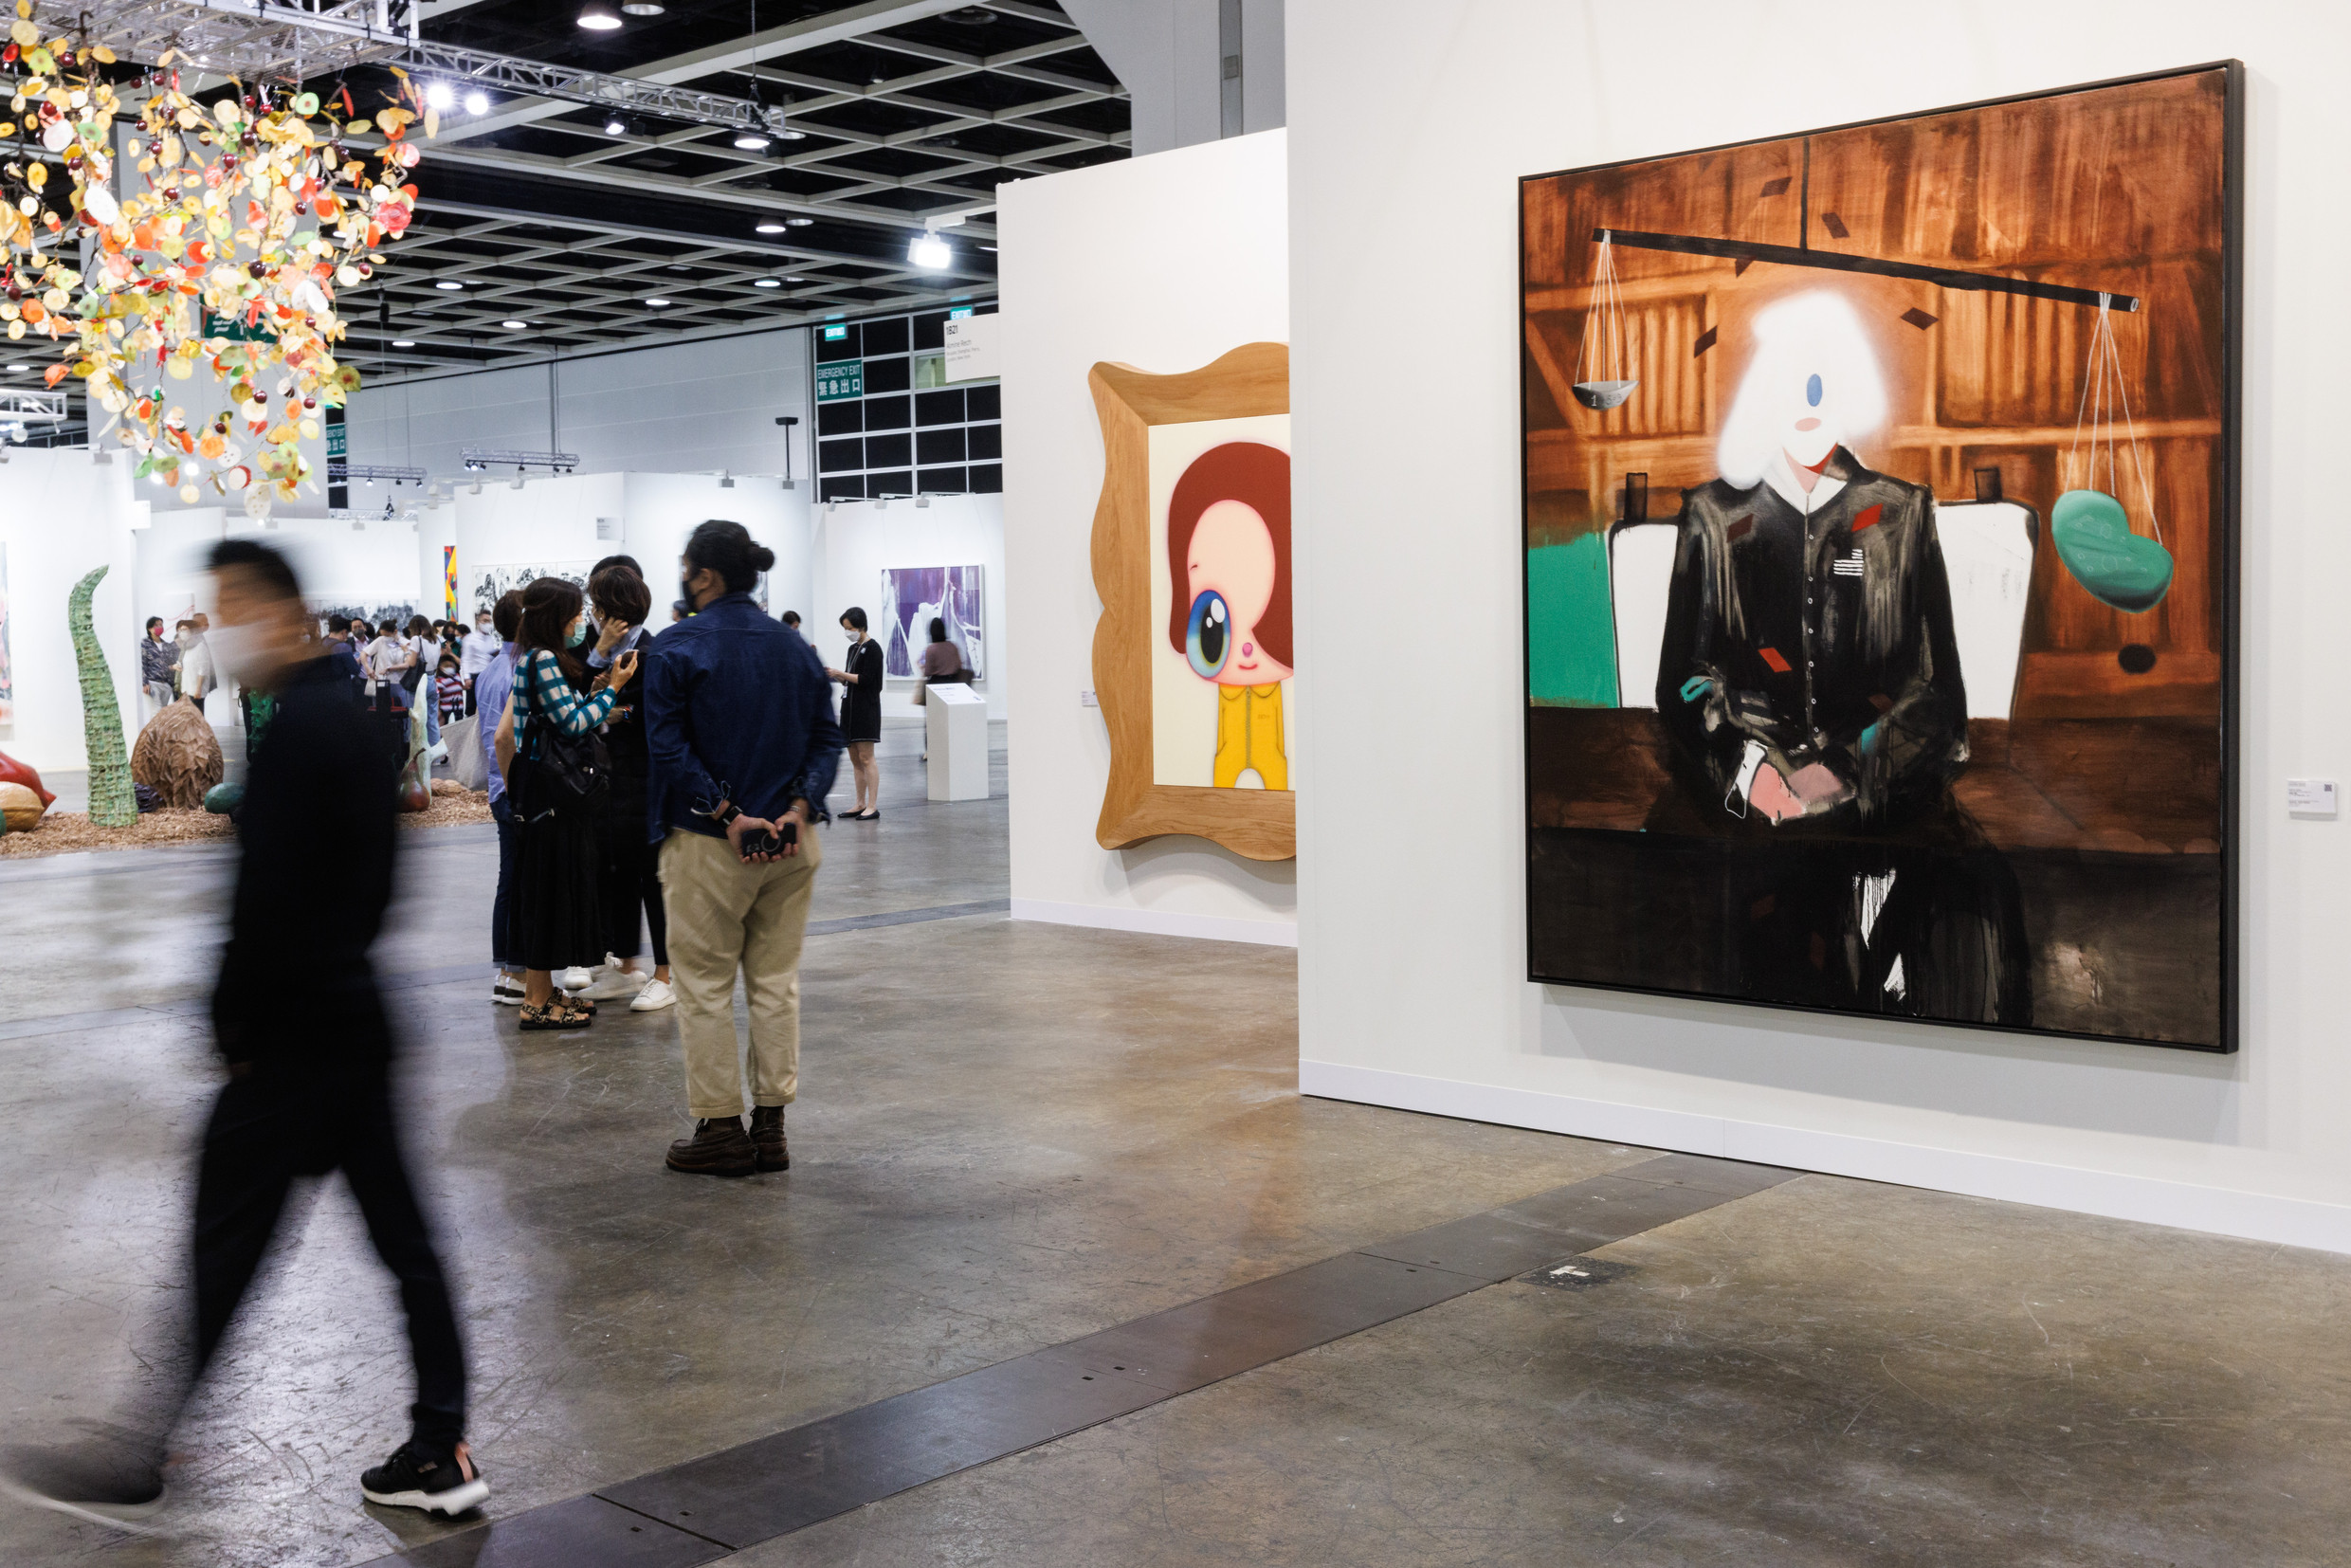 Art Basel Hong Kong returned to a hybrid format in 2021, and is preparing for its biggest physical event yet in 2023. Photo: LightRocket via Getty Images